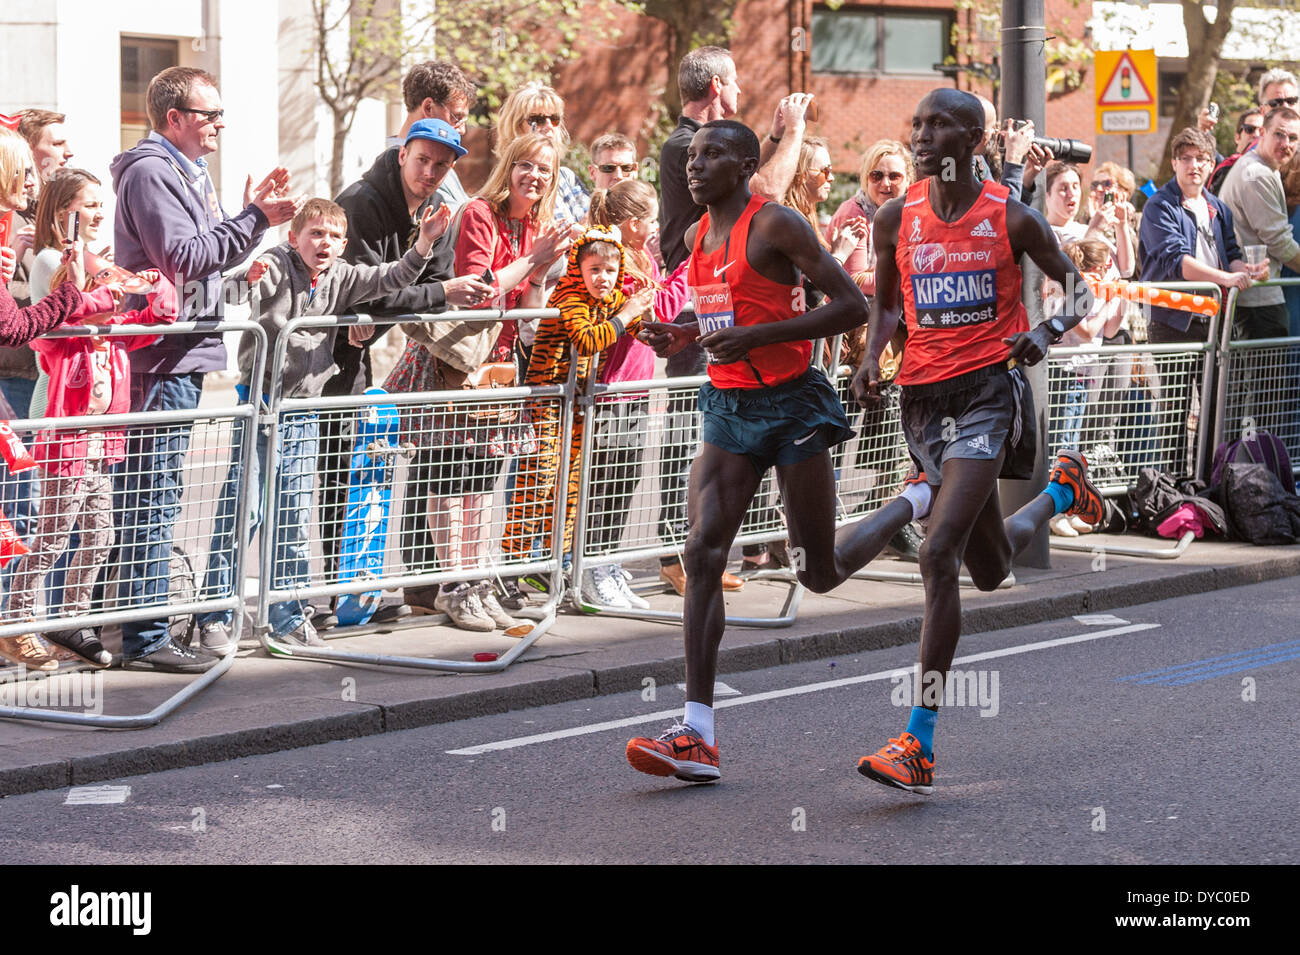 Lower Thames Street, London, UK, 13 April 2014, near mile 23, Virgin Money London Marathon 2014.  Wilson Kipsang (right) and Stanley Biwot, both Kenya. Kipsang would go on to beat Biwot into second place, and win the race in a course record time of 2:04.27, and earn his second London Marathon title.   Credit:  Stephen Chung/Alamy Live News Stock Photo